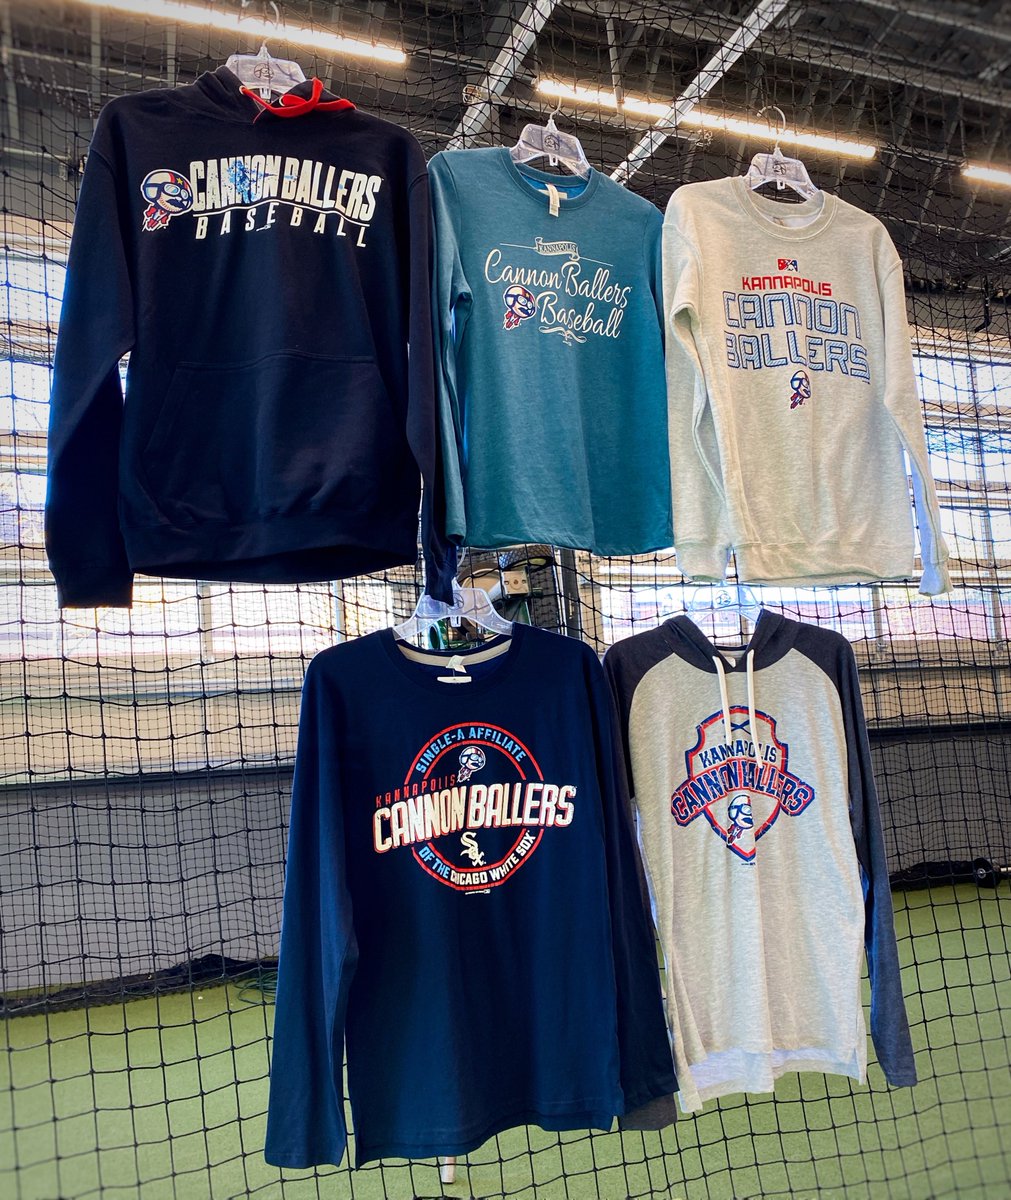 Winter is coming, which means it's time to buy your winter gear ❄️ Good news is, we have a variety of long sleeve KCB gear available at the Cannon City Supply Co.! ⭐️Cannon City Supply Co. Team Store Hours⭐️ Wed.-Sat.: Noon - 5pm Shop Online 24/7: kcballers.milbstore.com